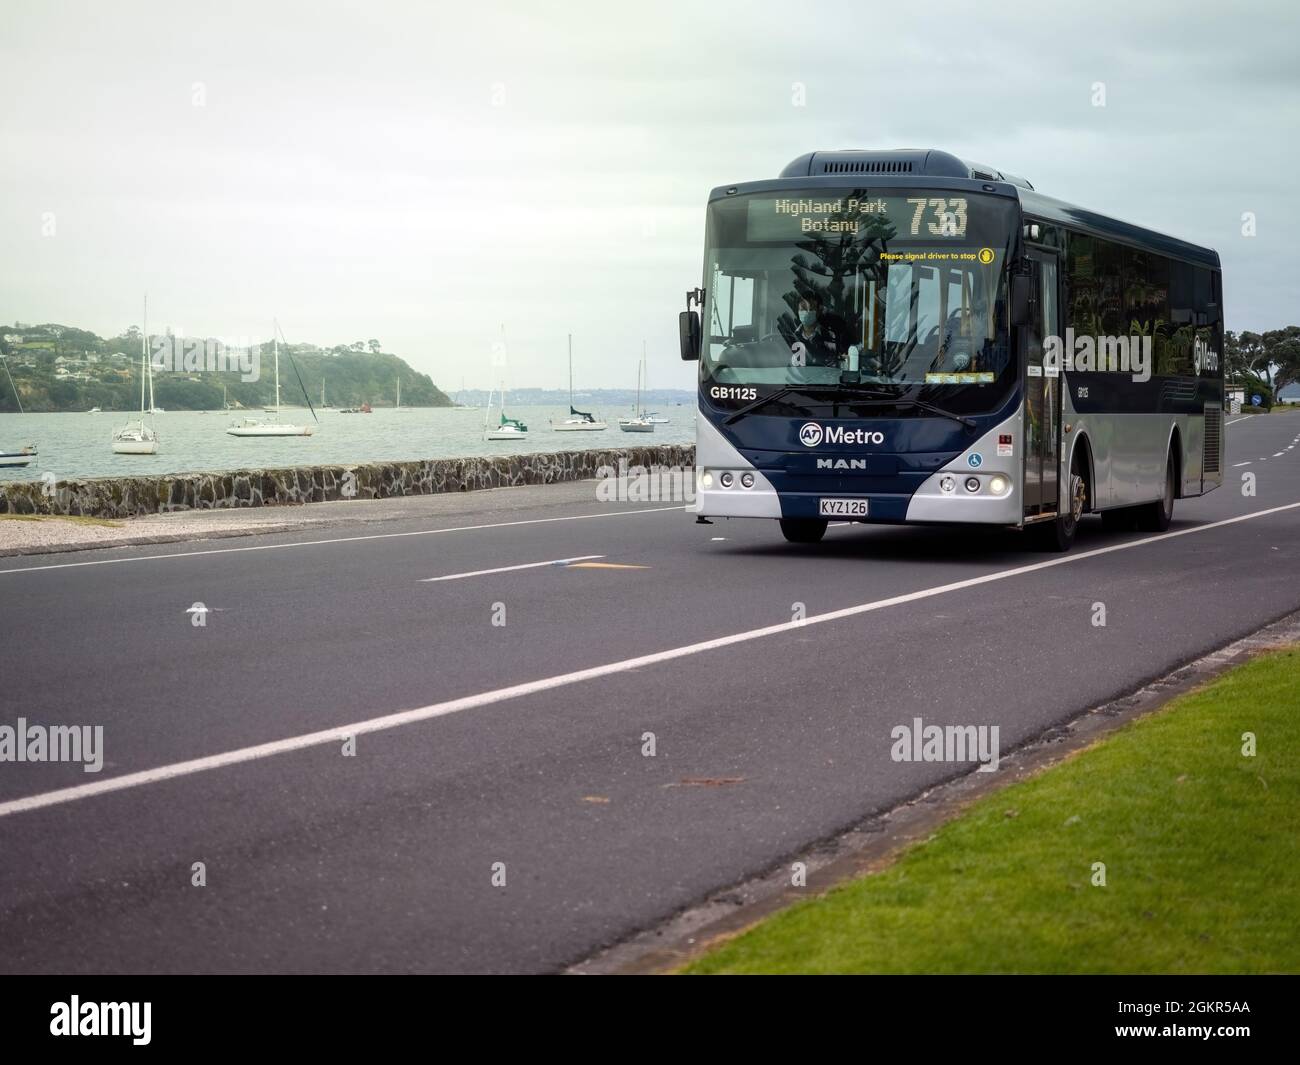 AUCKLAND, NEW ZEALAND - Jul 07, 2021: An AT Metro bus at the Parade in Bucklands Beach in Auckland, New Zealand on a gloomy day Stock Photo